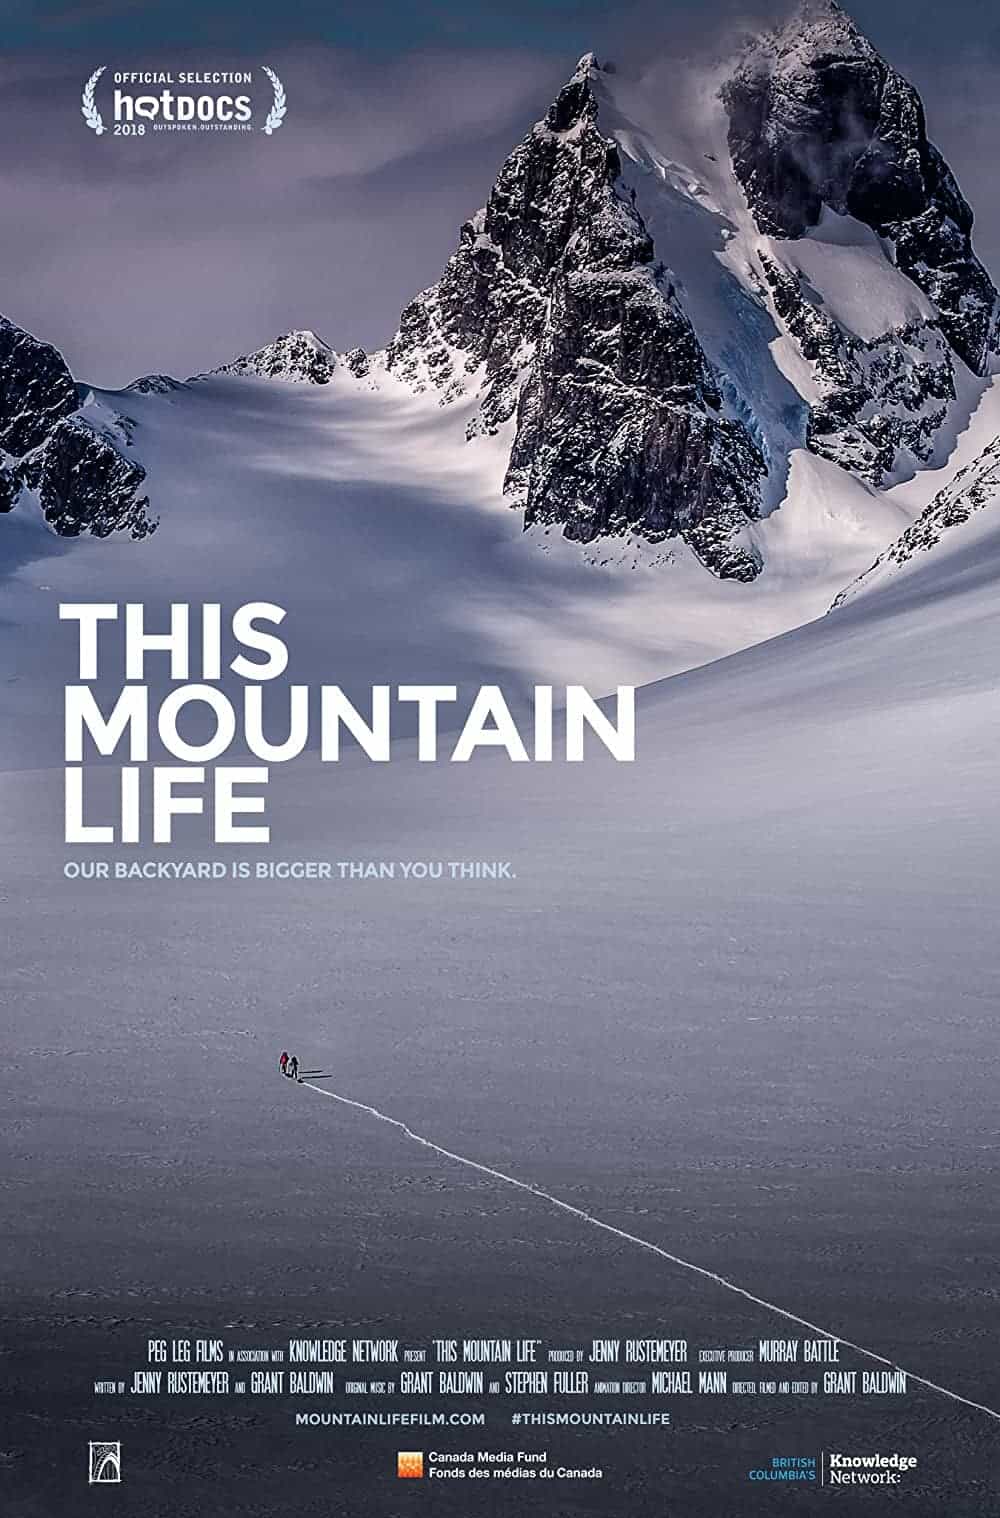 This Mountain Life (2018) Best Mountaineering Movies You Can't Miss